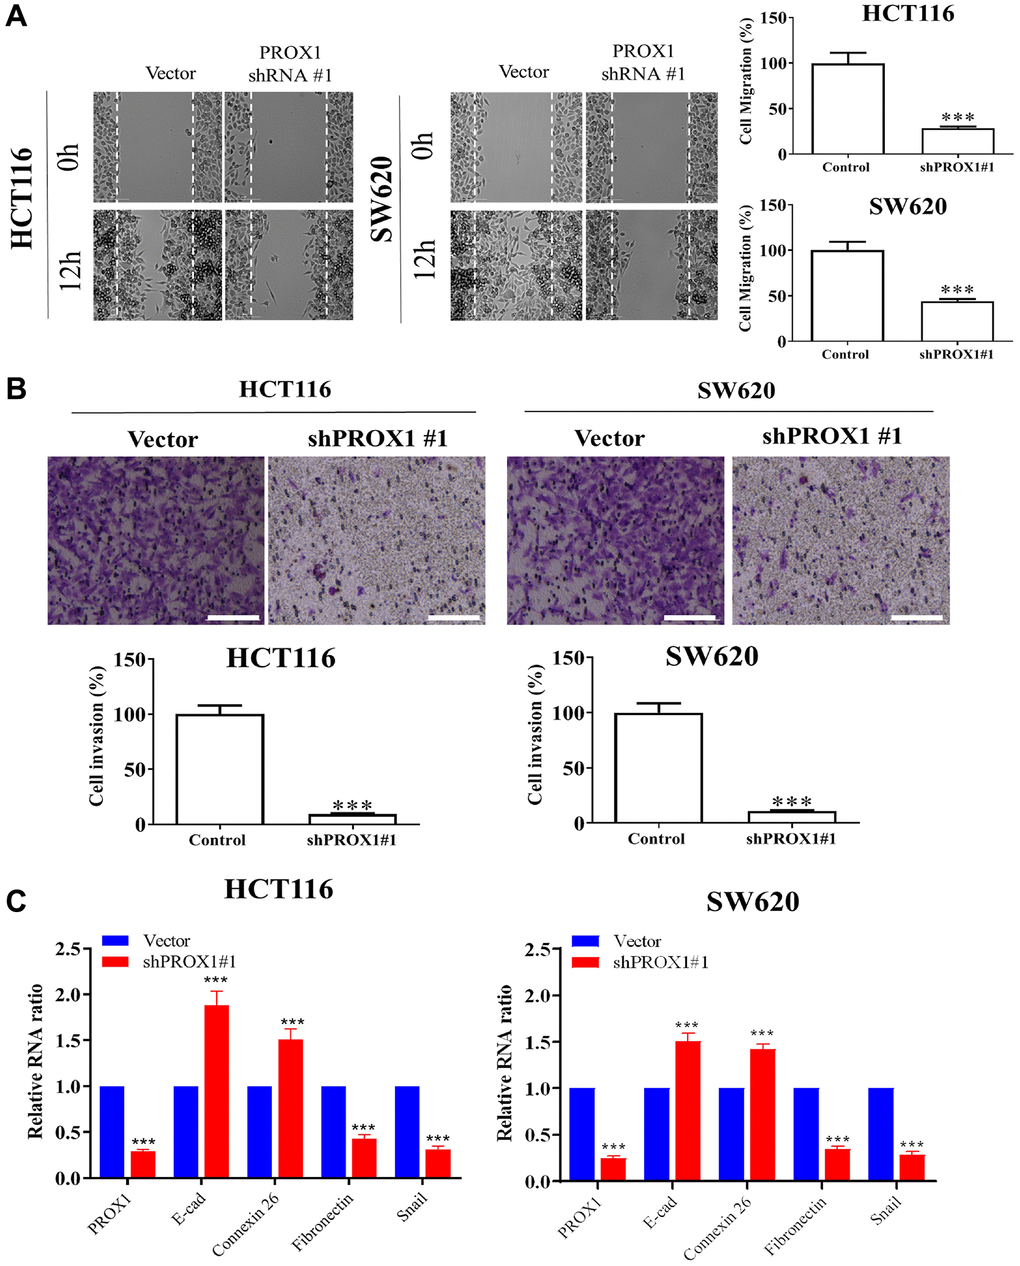 PROX1 knockdown reduces the migration and invasiveness of SW620 and HCT116 cells. (A) Wound healing assay for the inhibitory effect of PROX1 knockdown on HCT116 and SW620 cell migration. Cell migration into the wounded area was quantified based on the dashed line as time 0. Images were taken immediately after scratching, 0 h and 16 h later. Original magnification, ×200. Transwell invasion assay shows the invasive ability of (B) HCT116 and SW-620, significantly suppressed in PROX1 shRNA-infected cells. (C) RT-PCR shows PROX1 knockdown suppressed transcript expression of Fibronectin and Snail while upregulating E-cadherin and Connexin 26. GAPDH is used as an internal control. Data are presented as mean ± SEM. *p **p ***P 